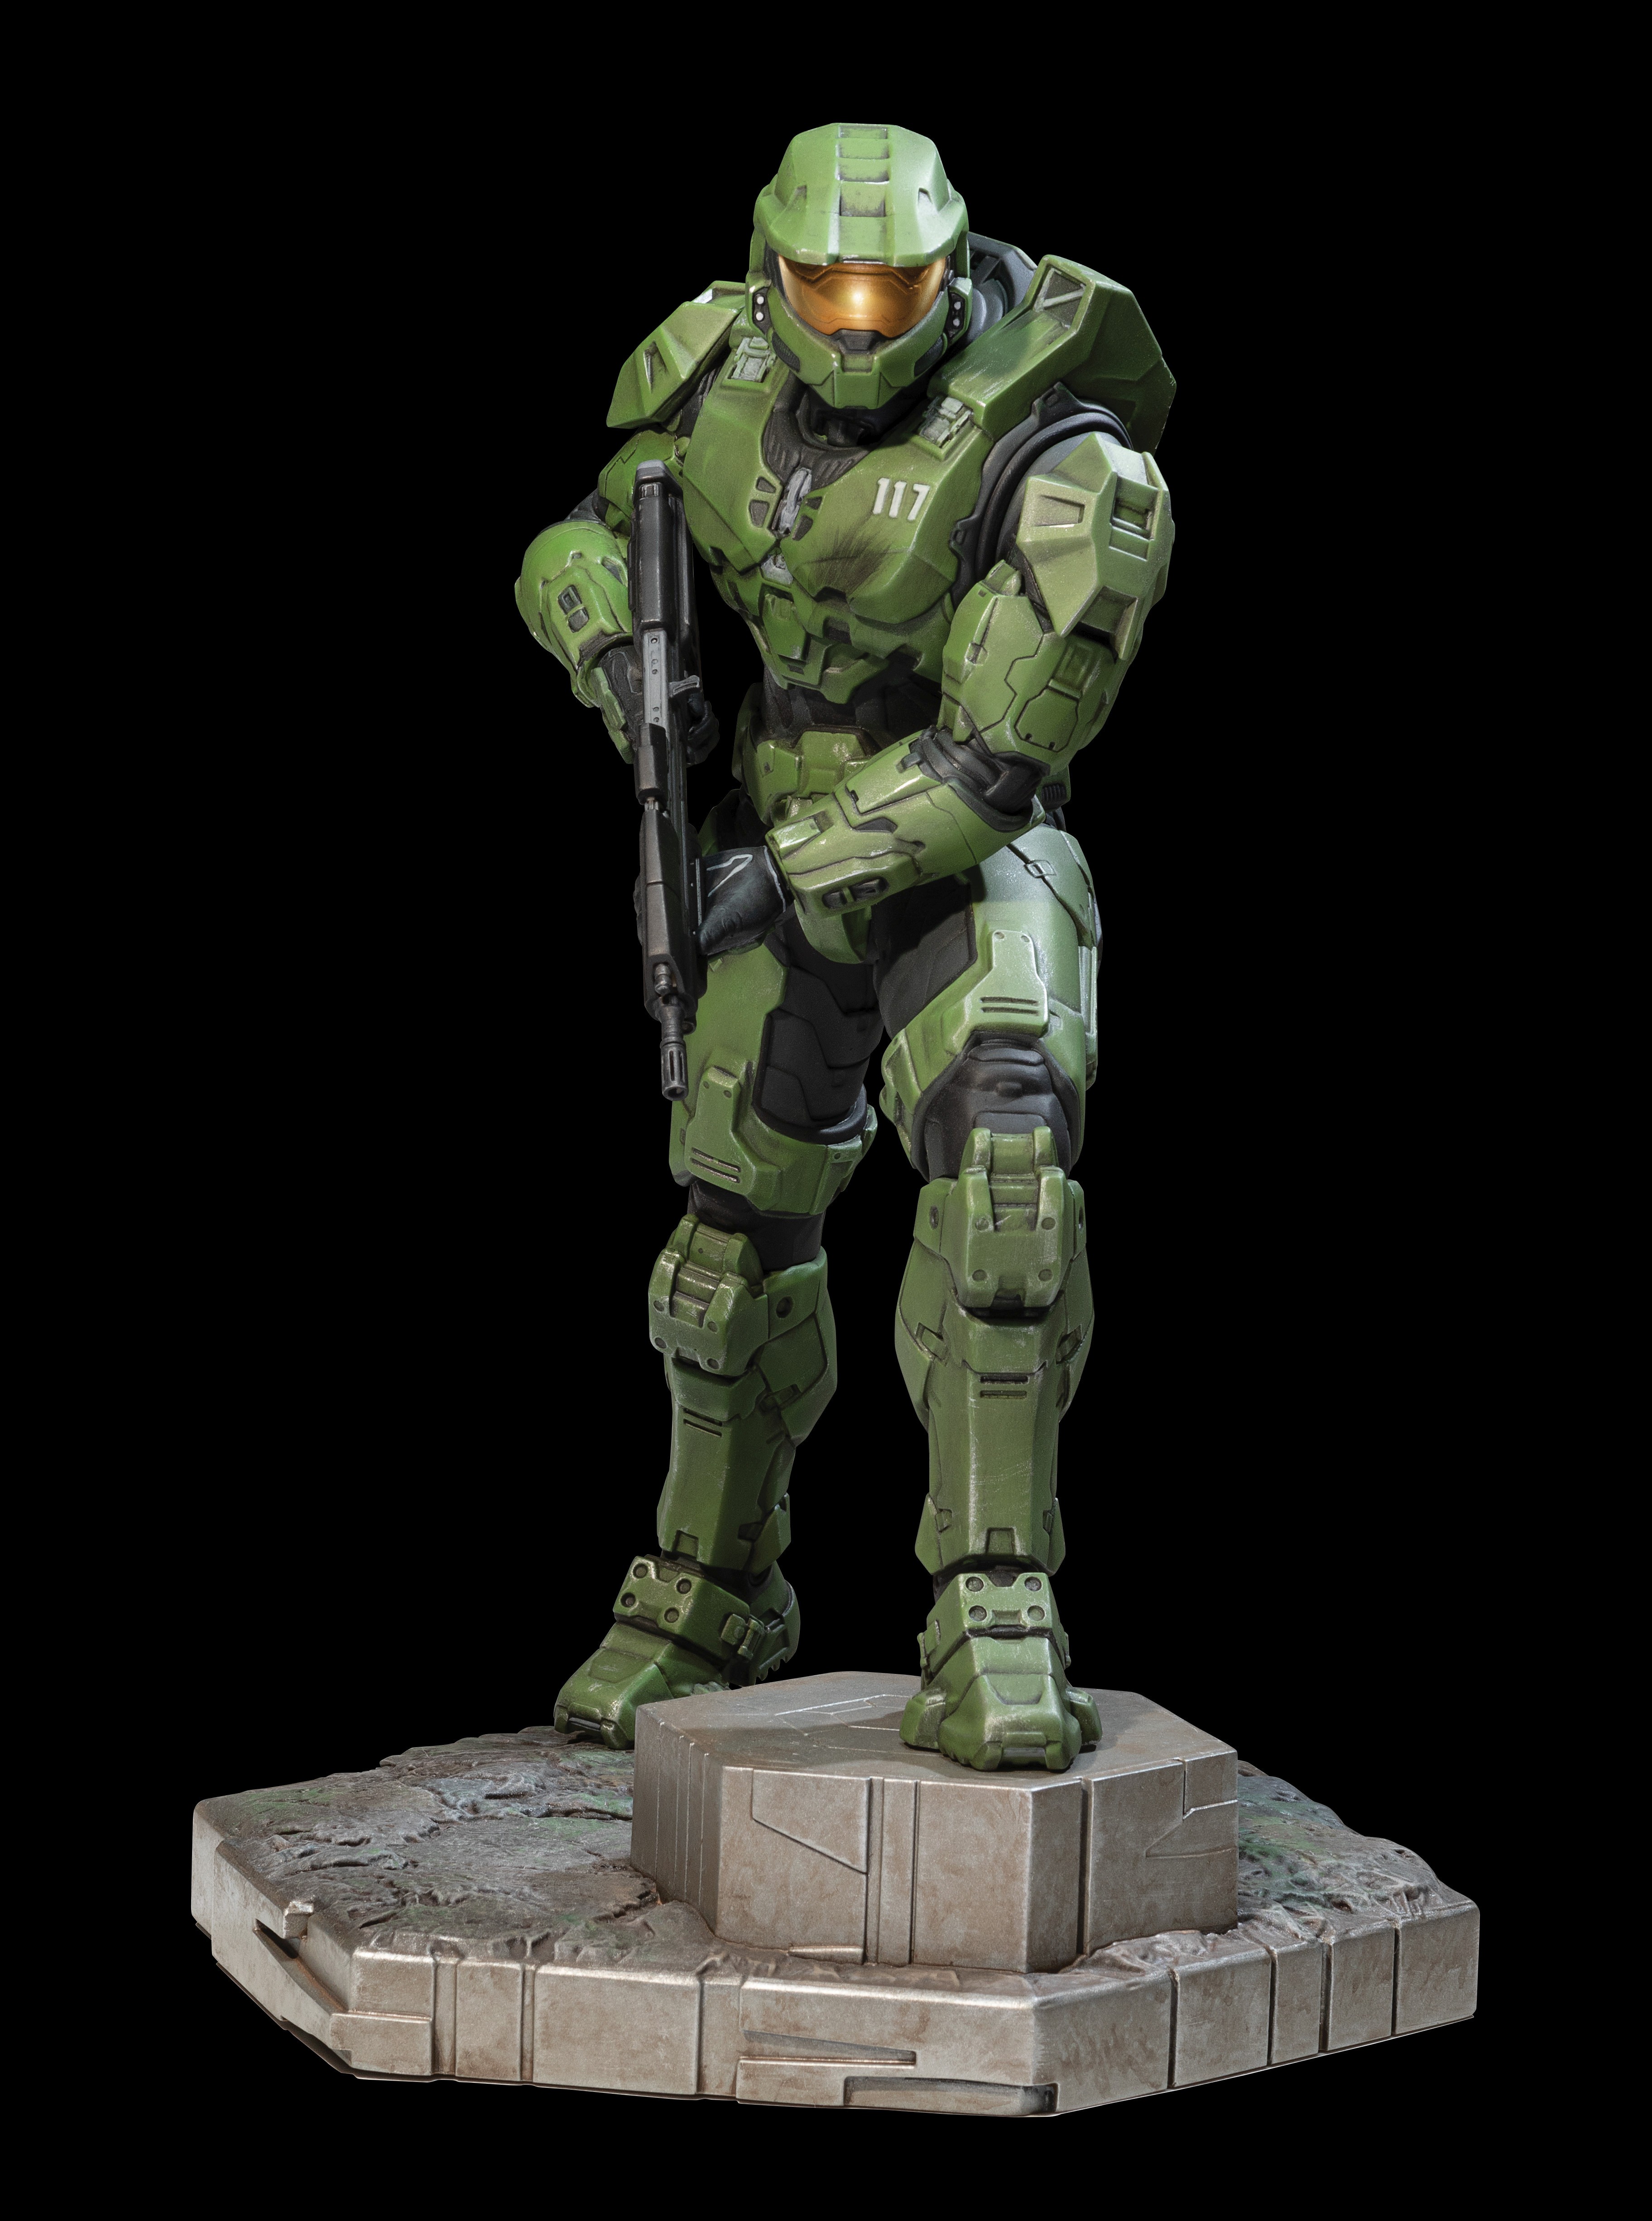 Bring on the Holiday Cheer with New Halo Toys - Xbox Wire